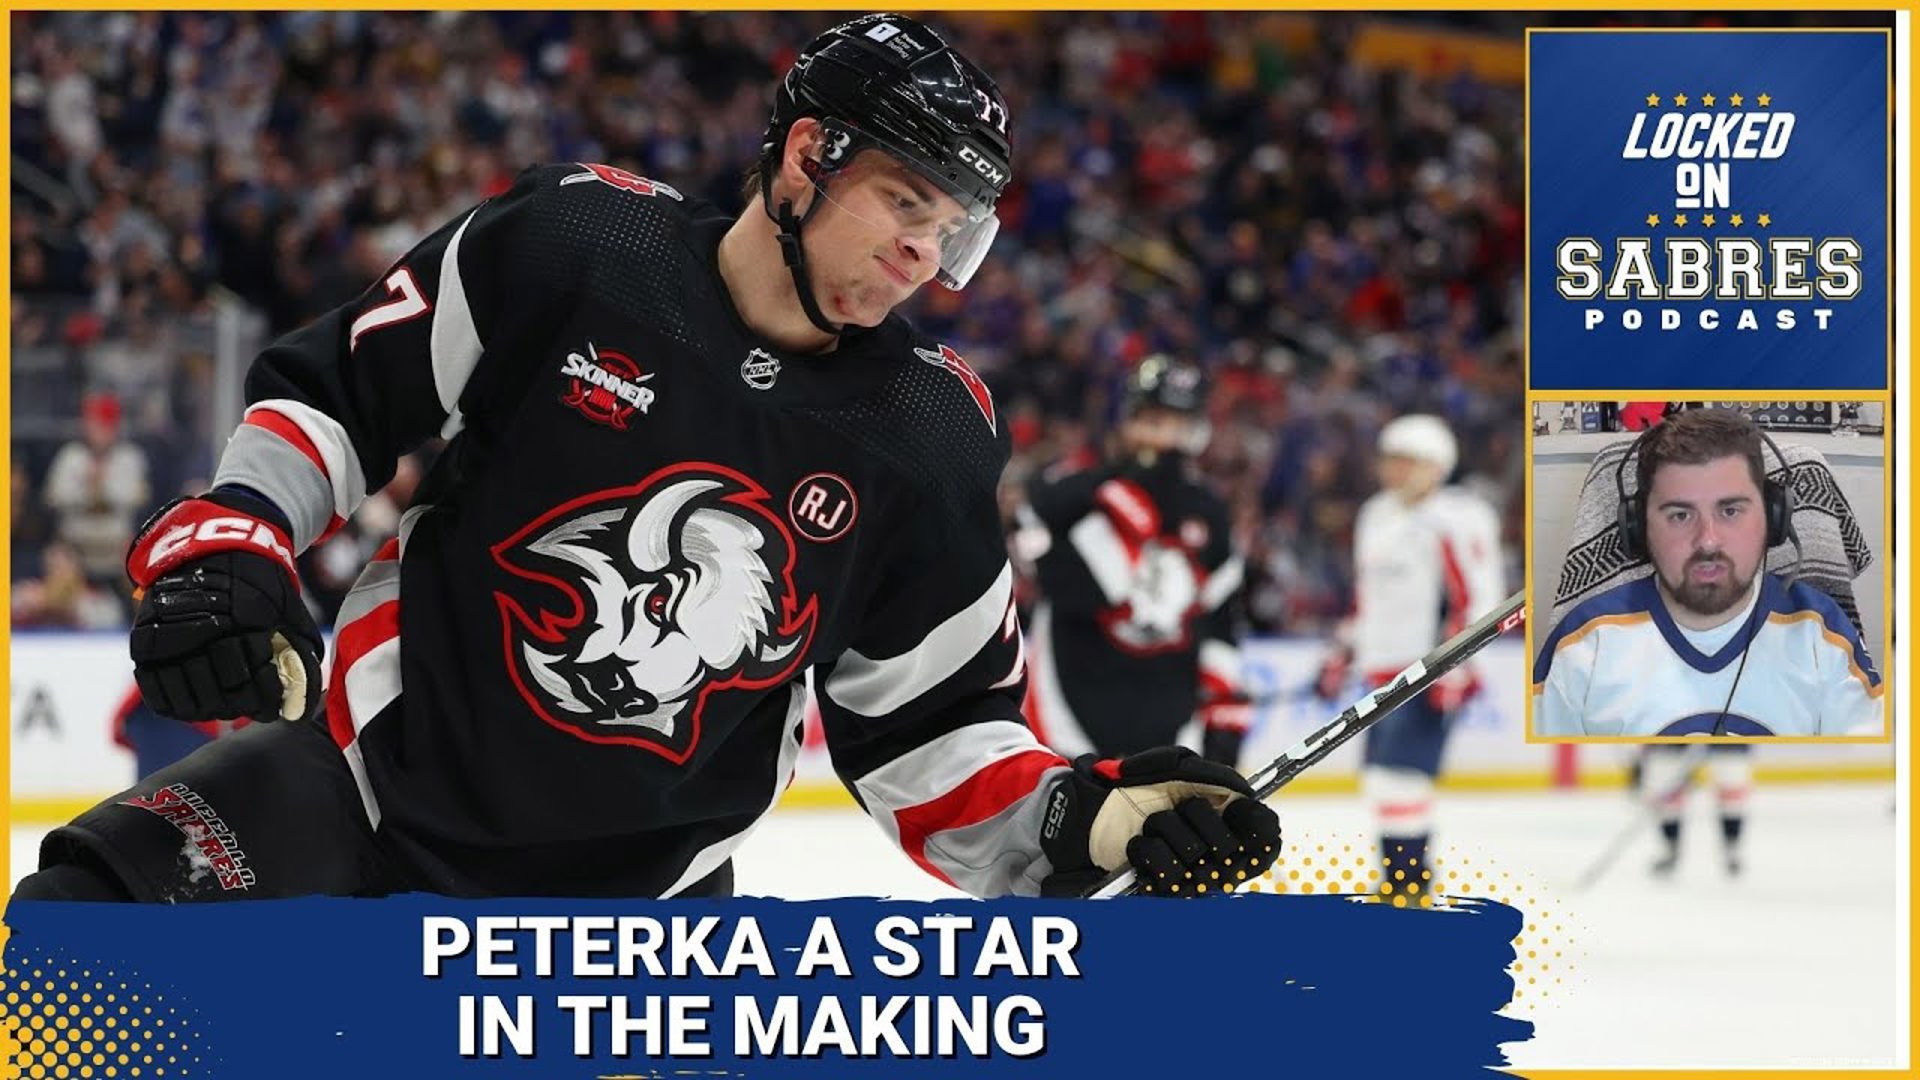 JJ Peterka is a star in the making for the Sabres